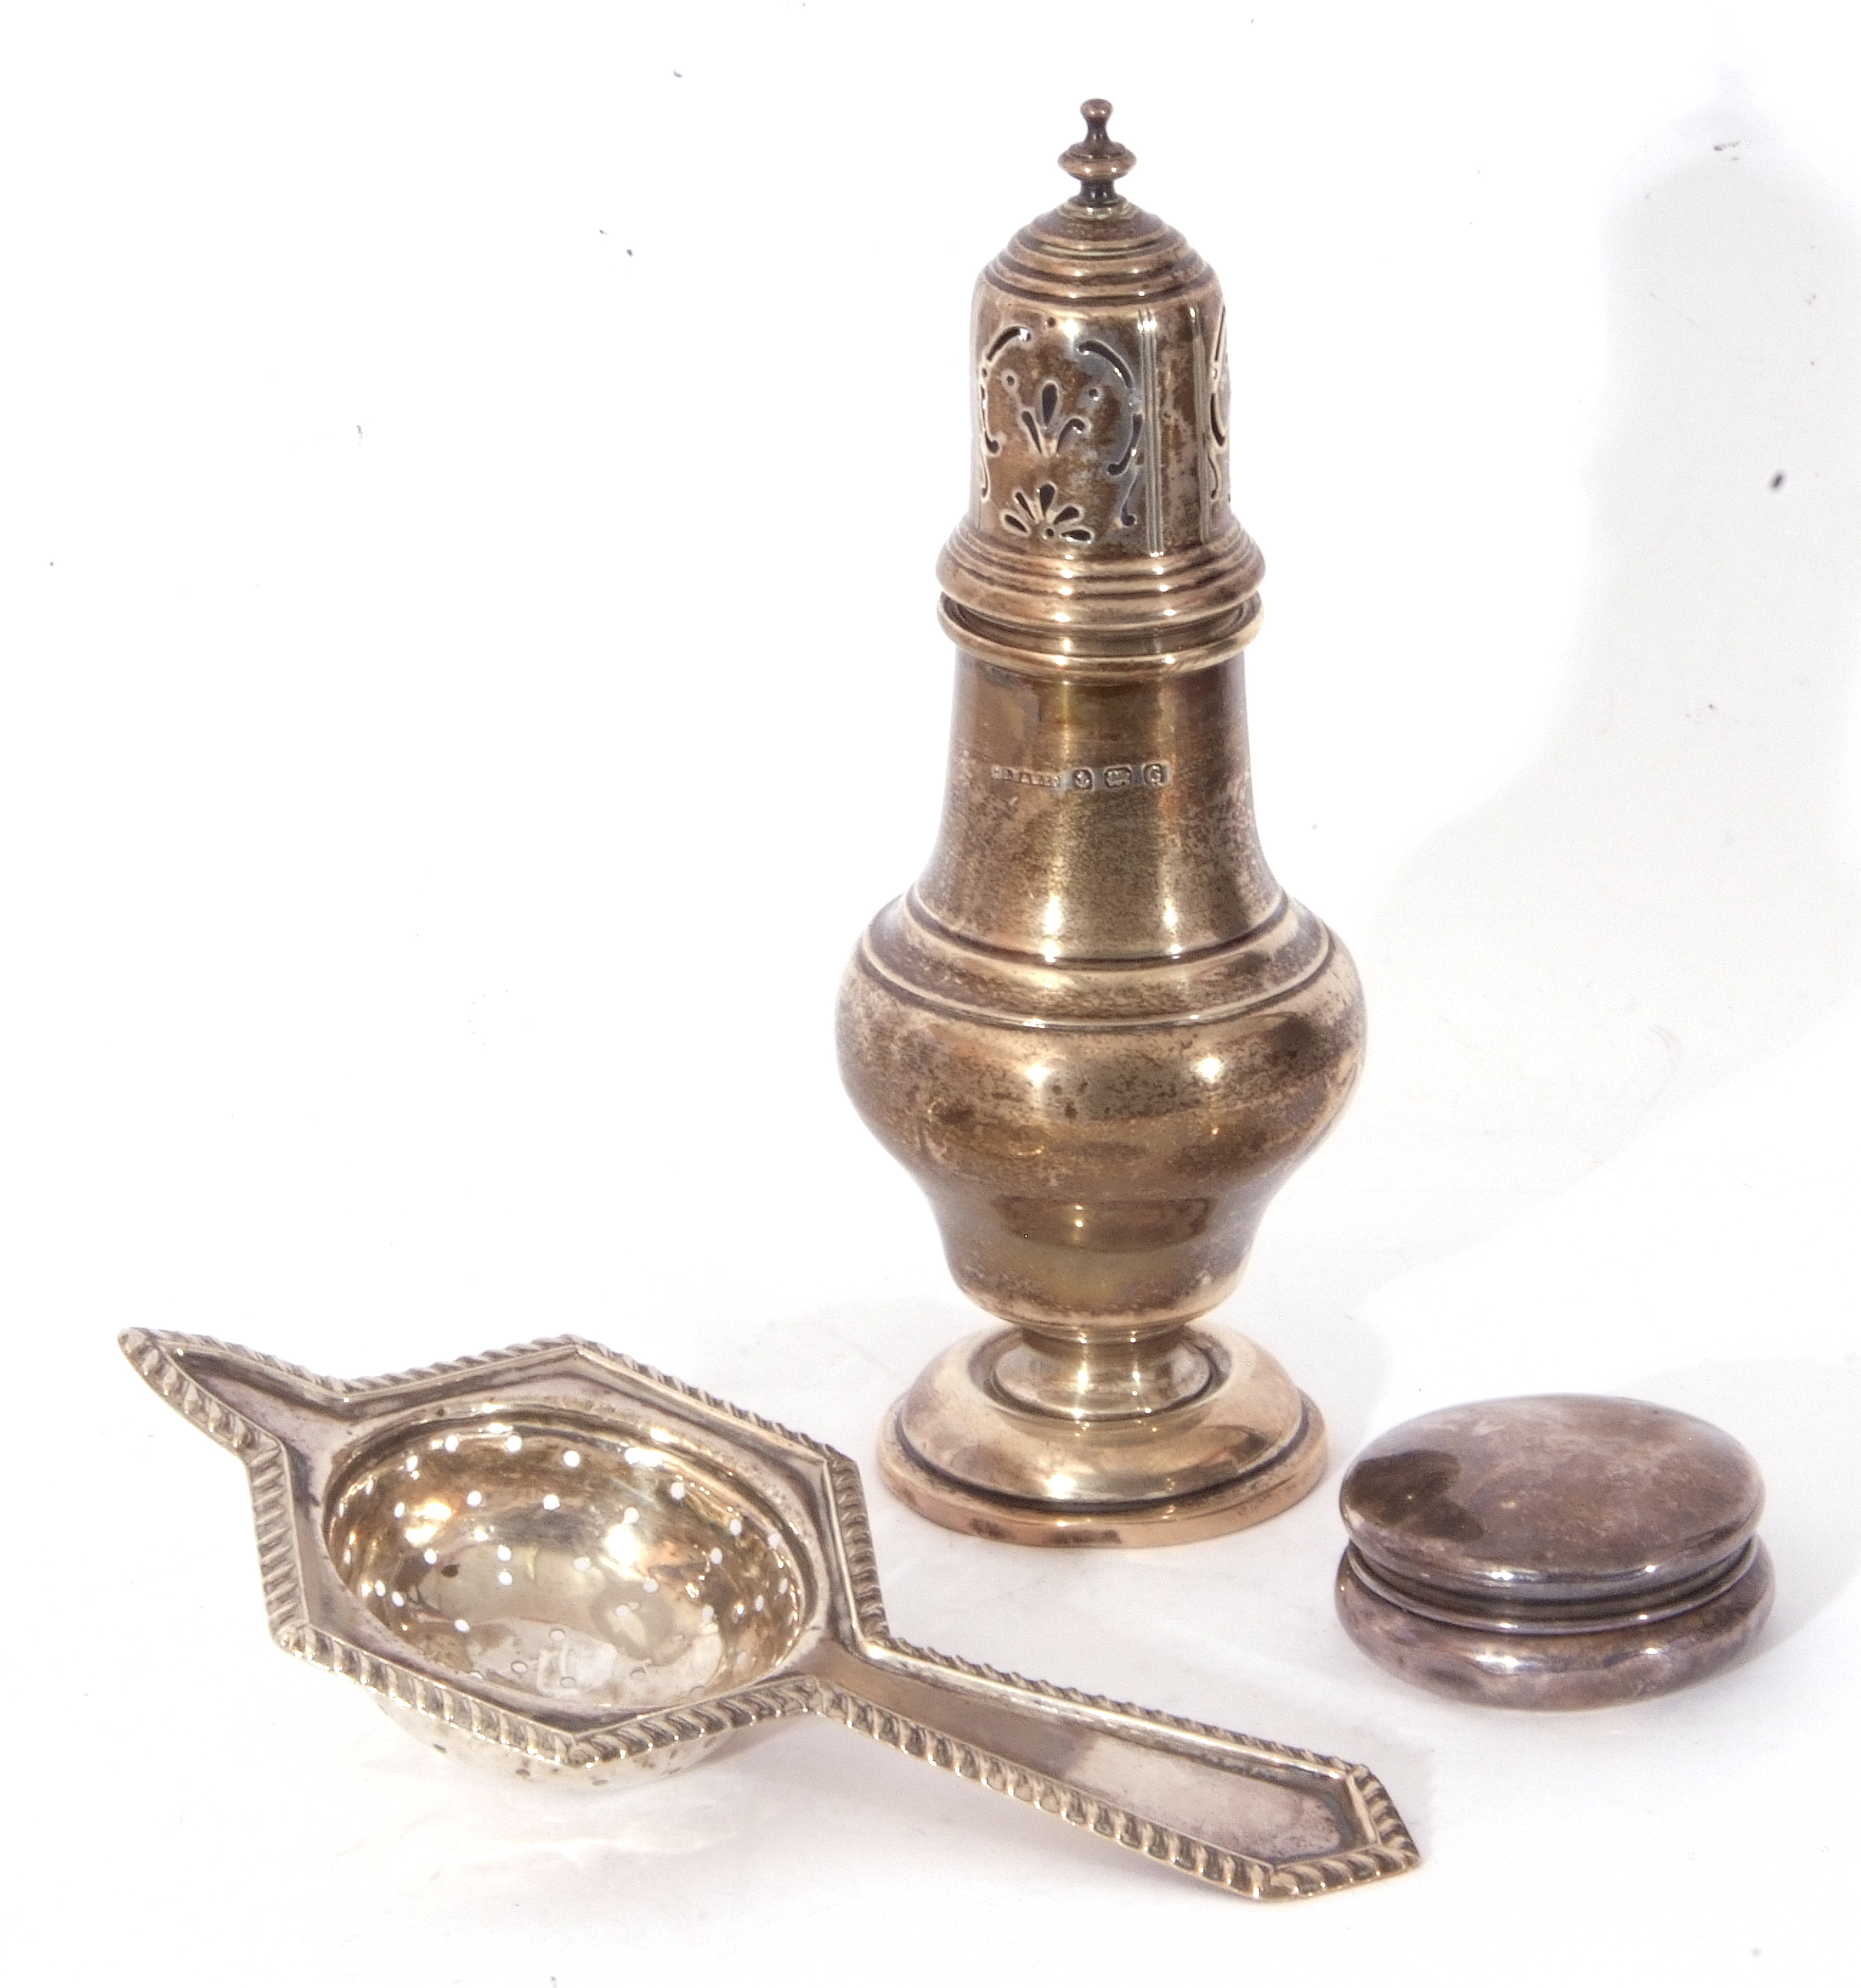 Mixed Lot: white metal hexagonal tea strainer, a Birmingham hallmarked baluster sugar sifter and a